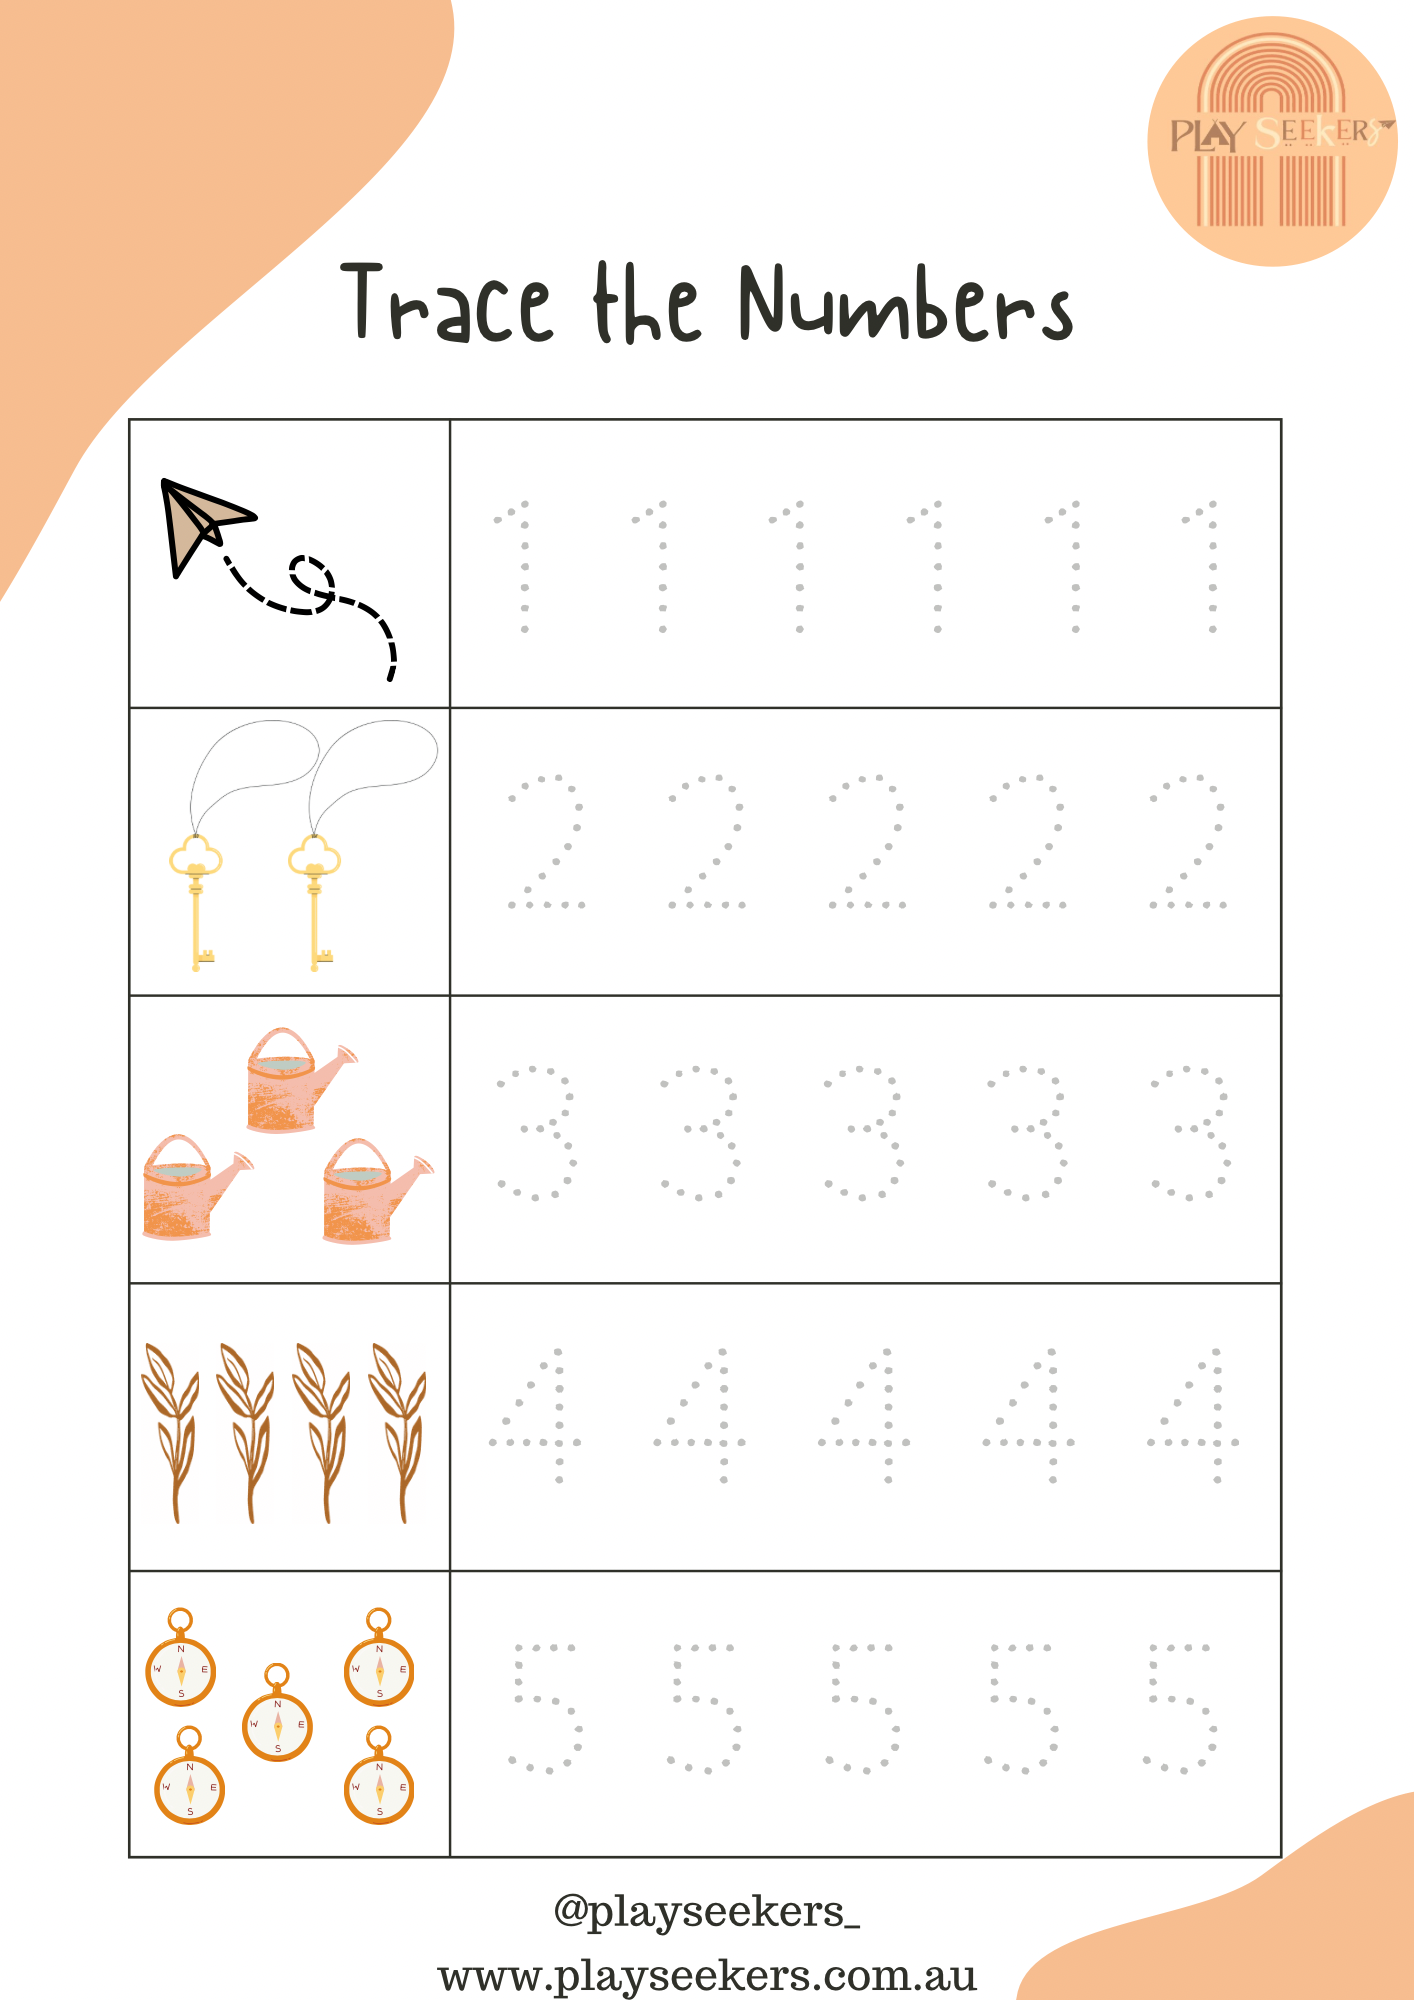 Trace the Numbers Activity Sheet- Free Download